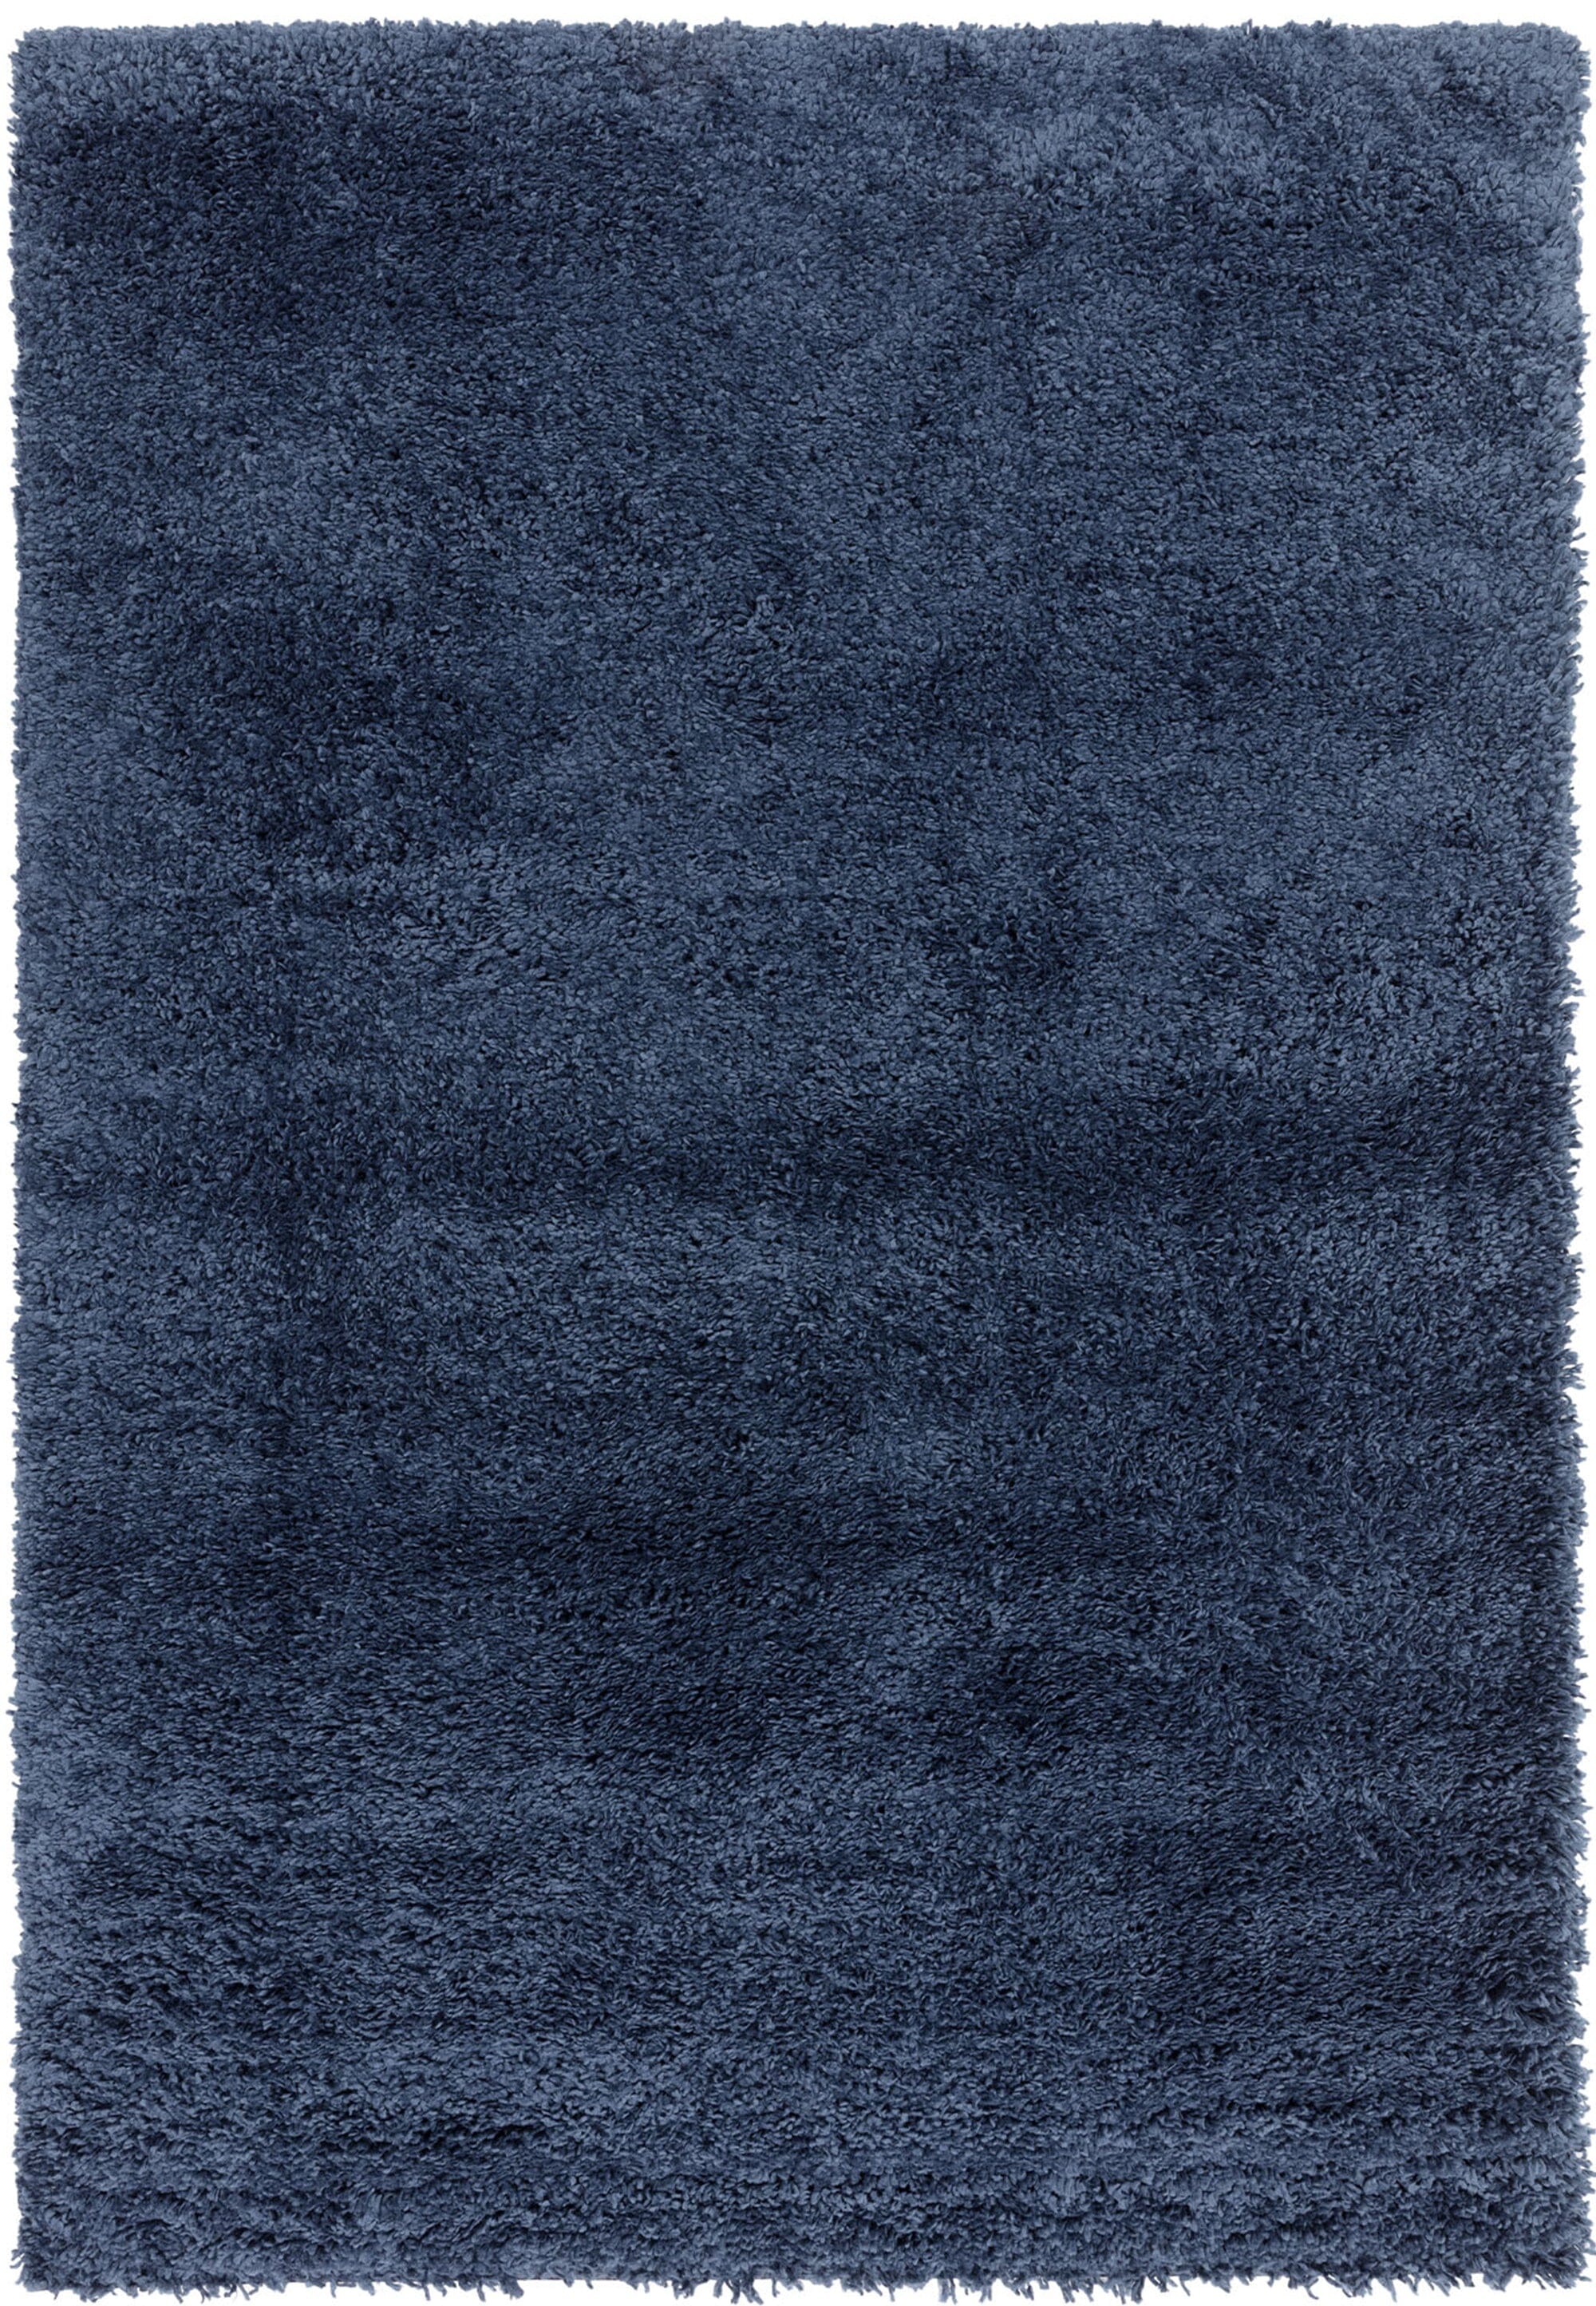 Ritchie Blue Soft Touch Shaggy Rug